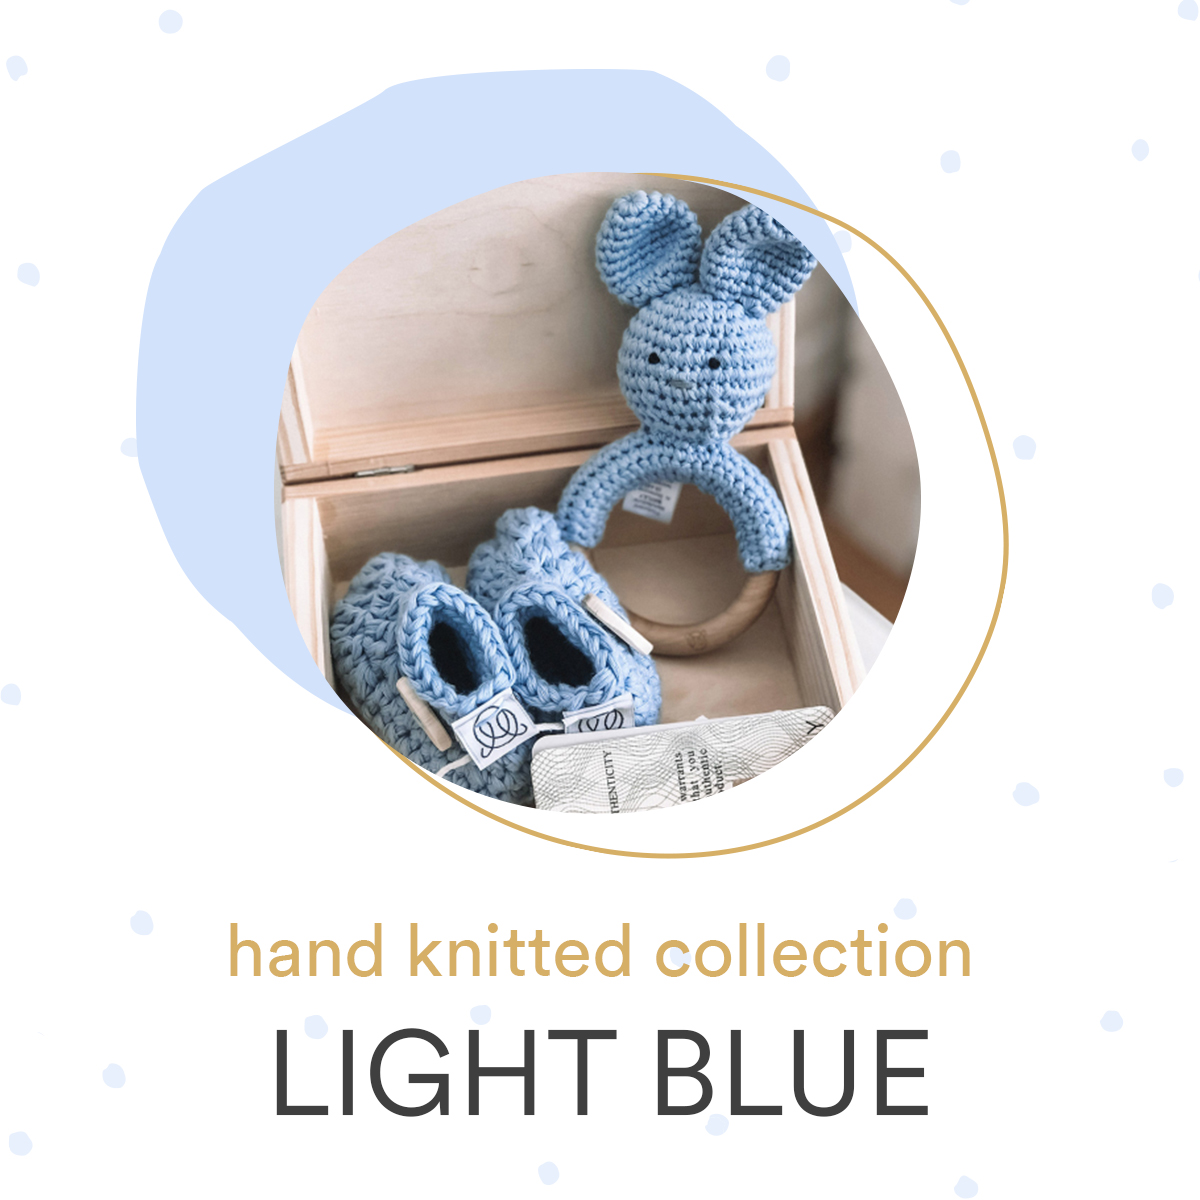 Hand knitted collection - Light blue